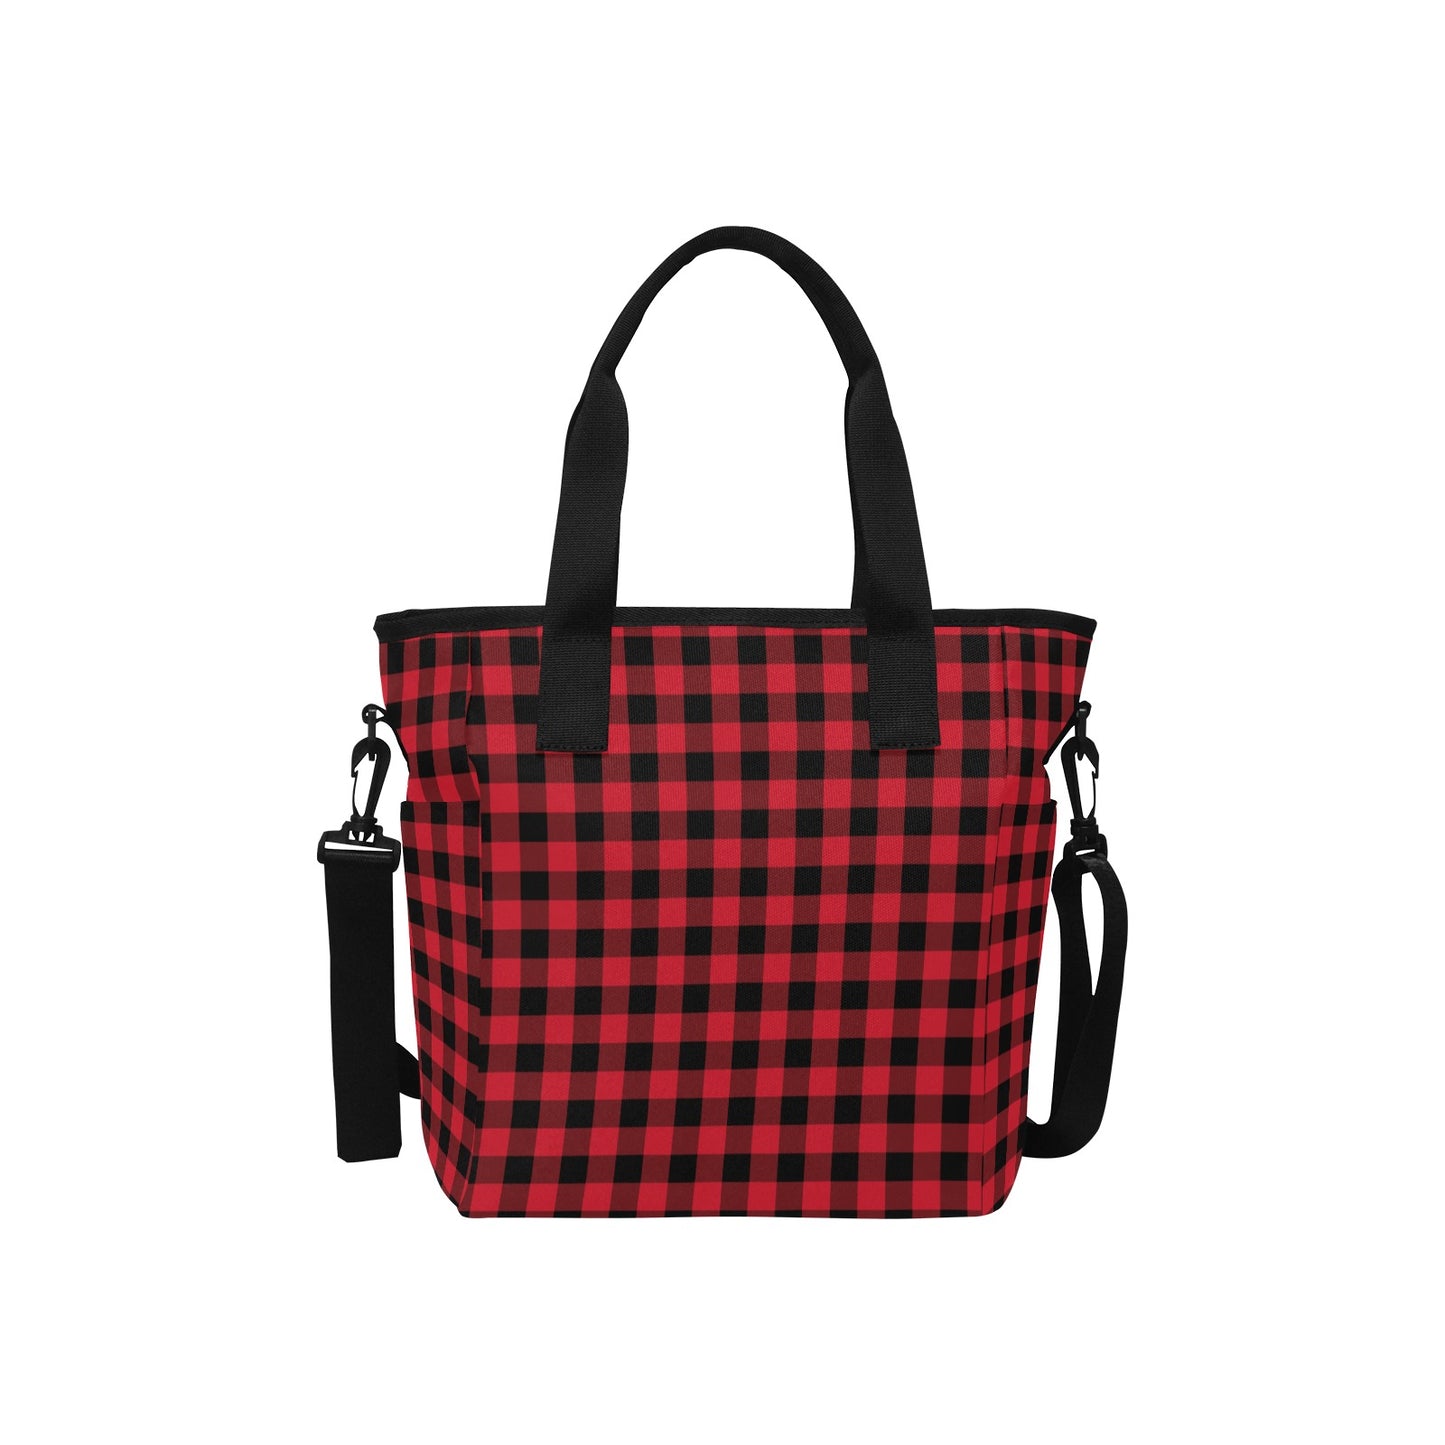 Red Buffalo Plaid Canvas Tote Bag with Shoulder Strap, Check Print Black Beach Summer Aesthetic Shopping Reusable Bag with Pockets